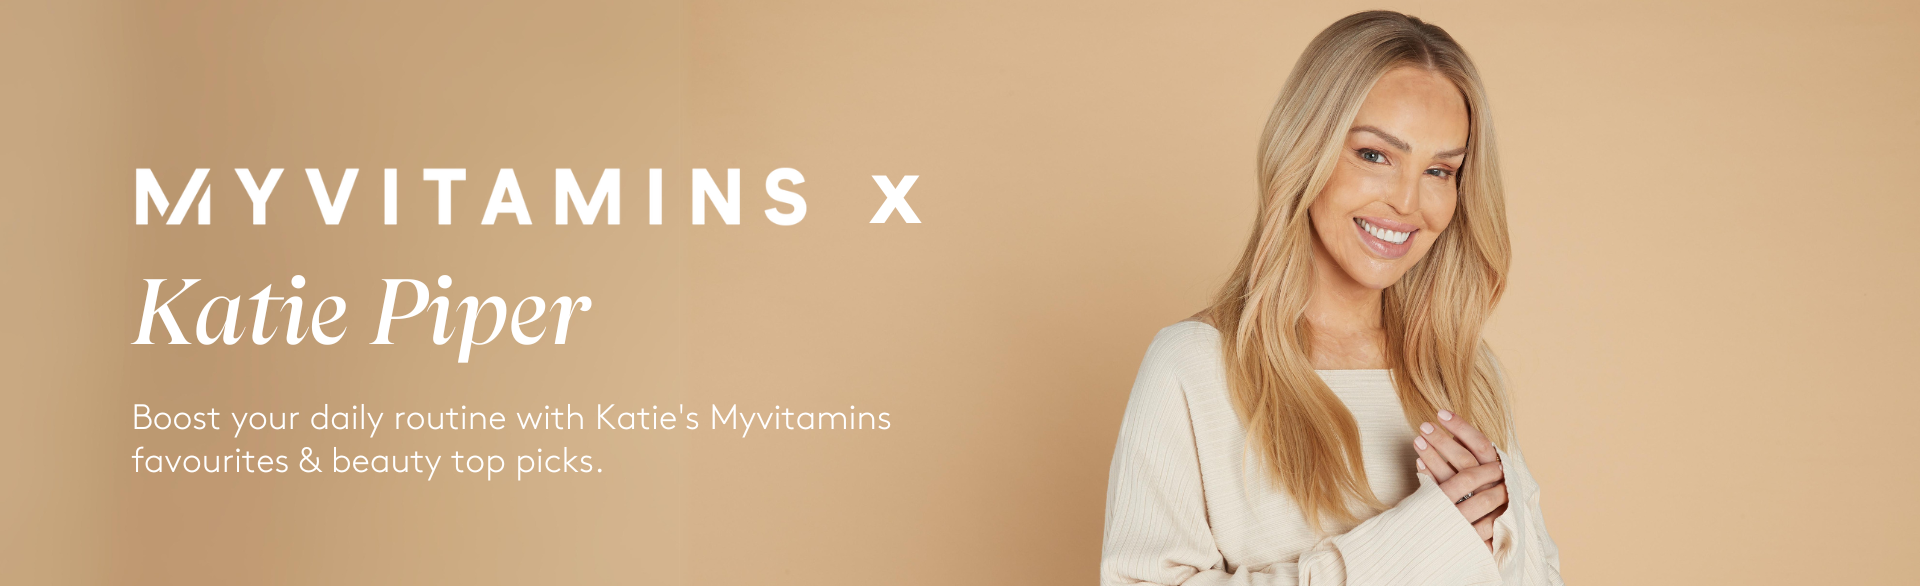 Katie Piper as a brand ambassador for Myprotein - highlighting her favourite vitamin gummies with Multivitamins and coconut and collagen capsules.